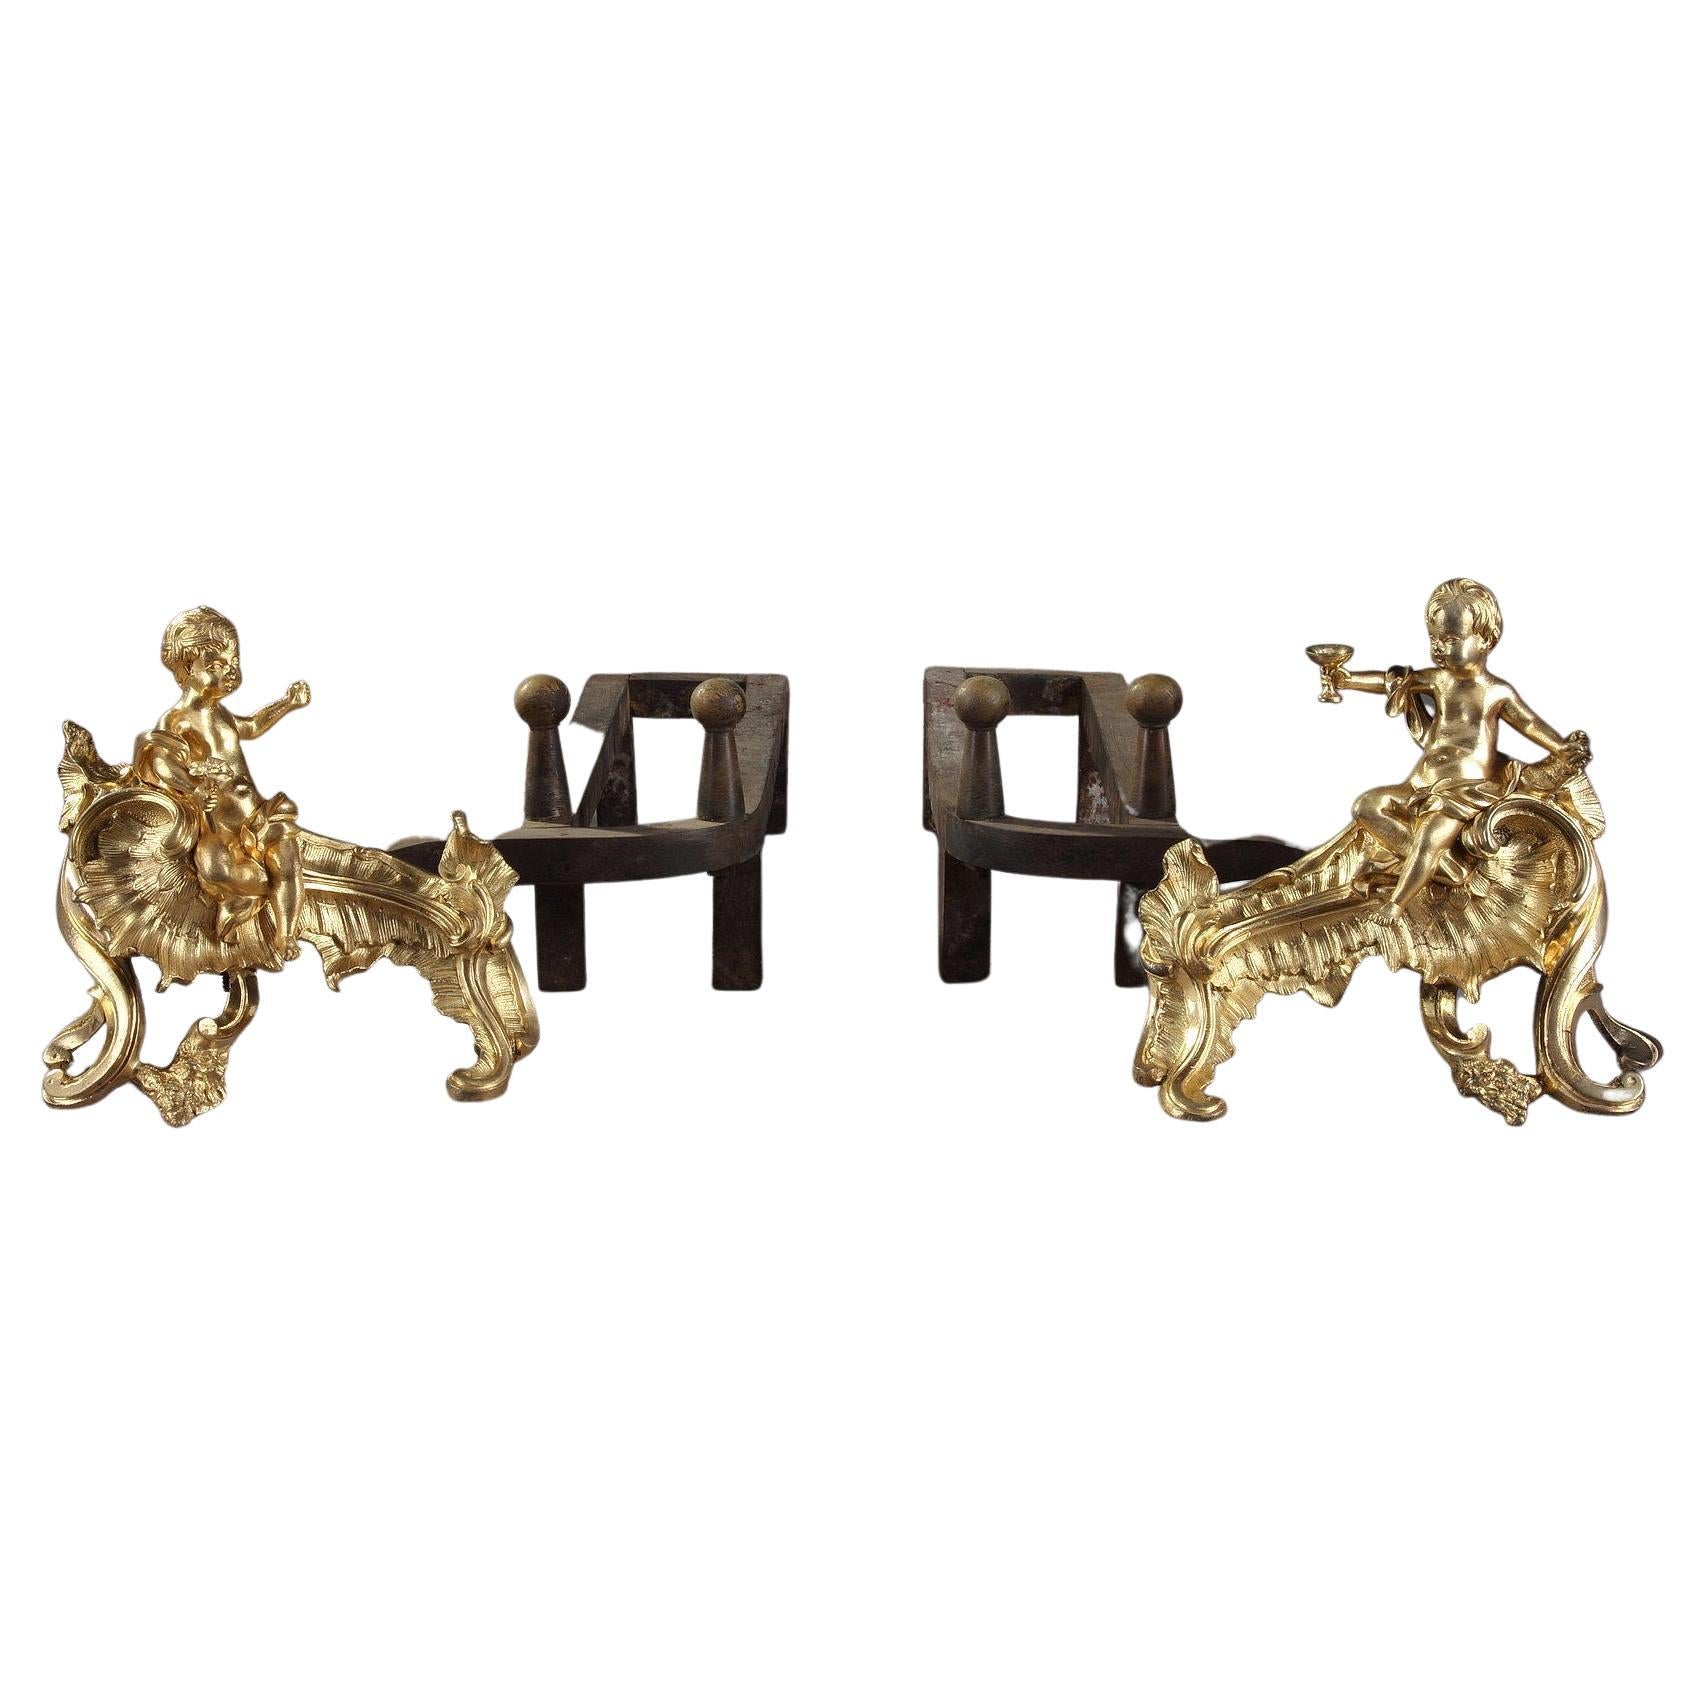 Pair of Chased and Gilded Bronze Andirons from the 18th Century